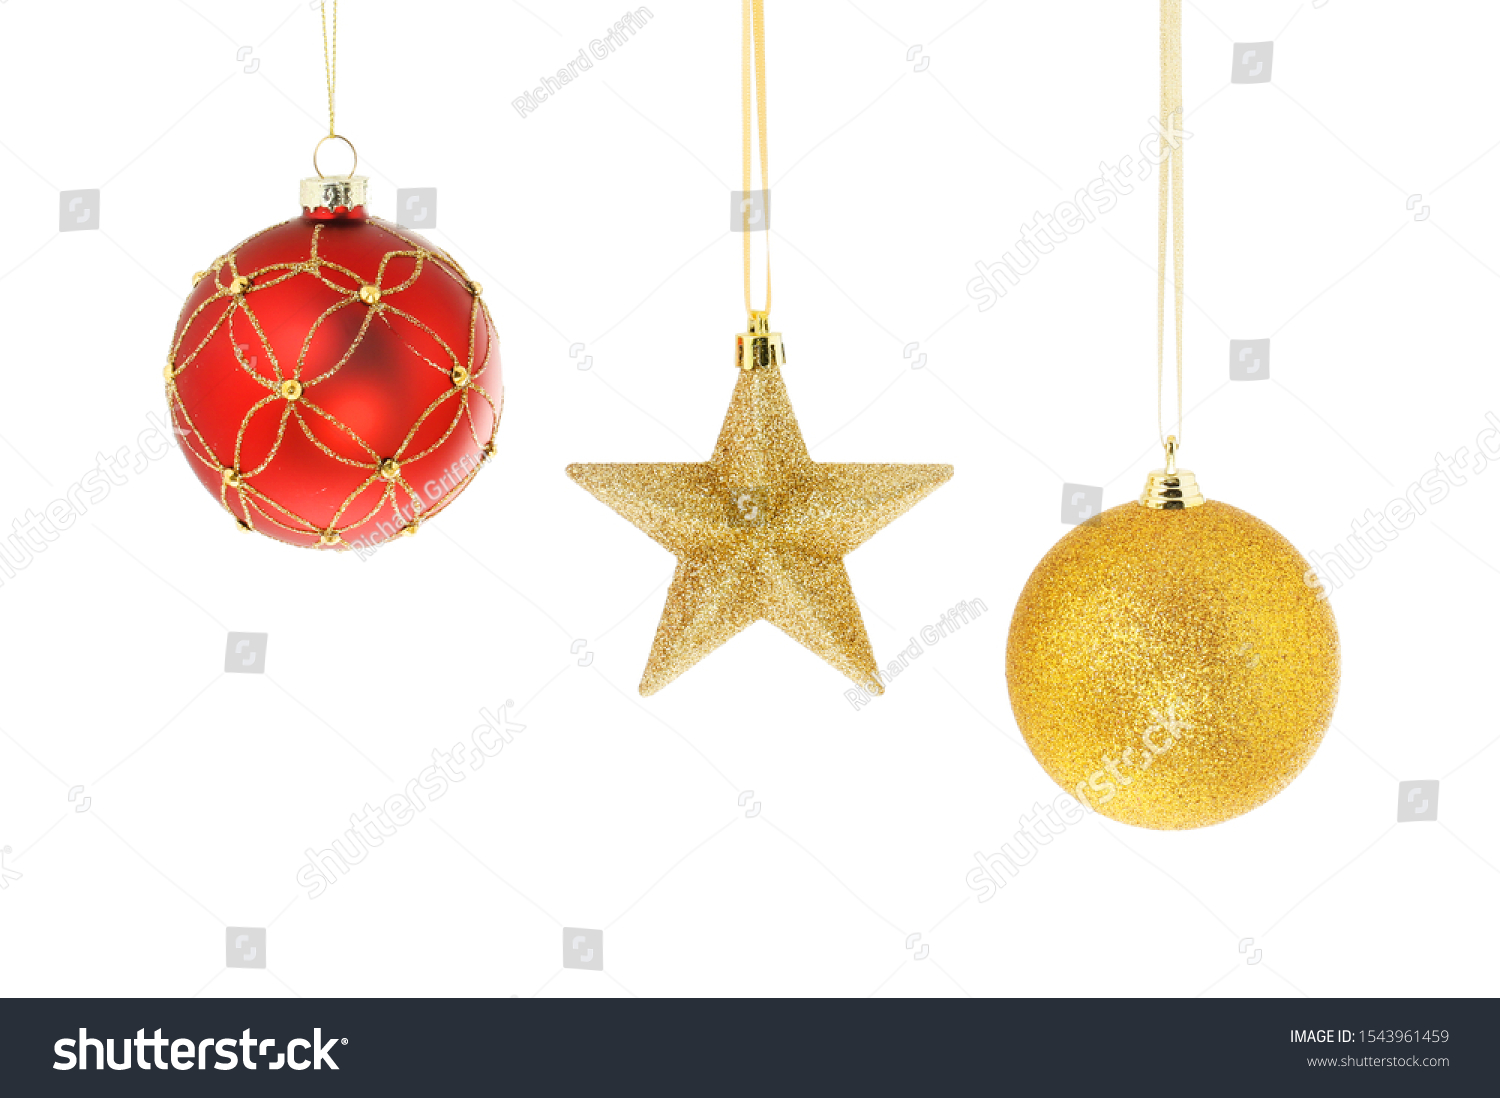 Gold star and baubles Christmas decorations isolated against white #1543961459